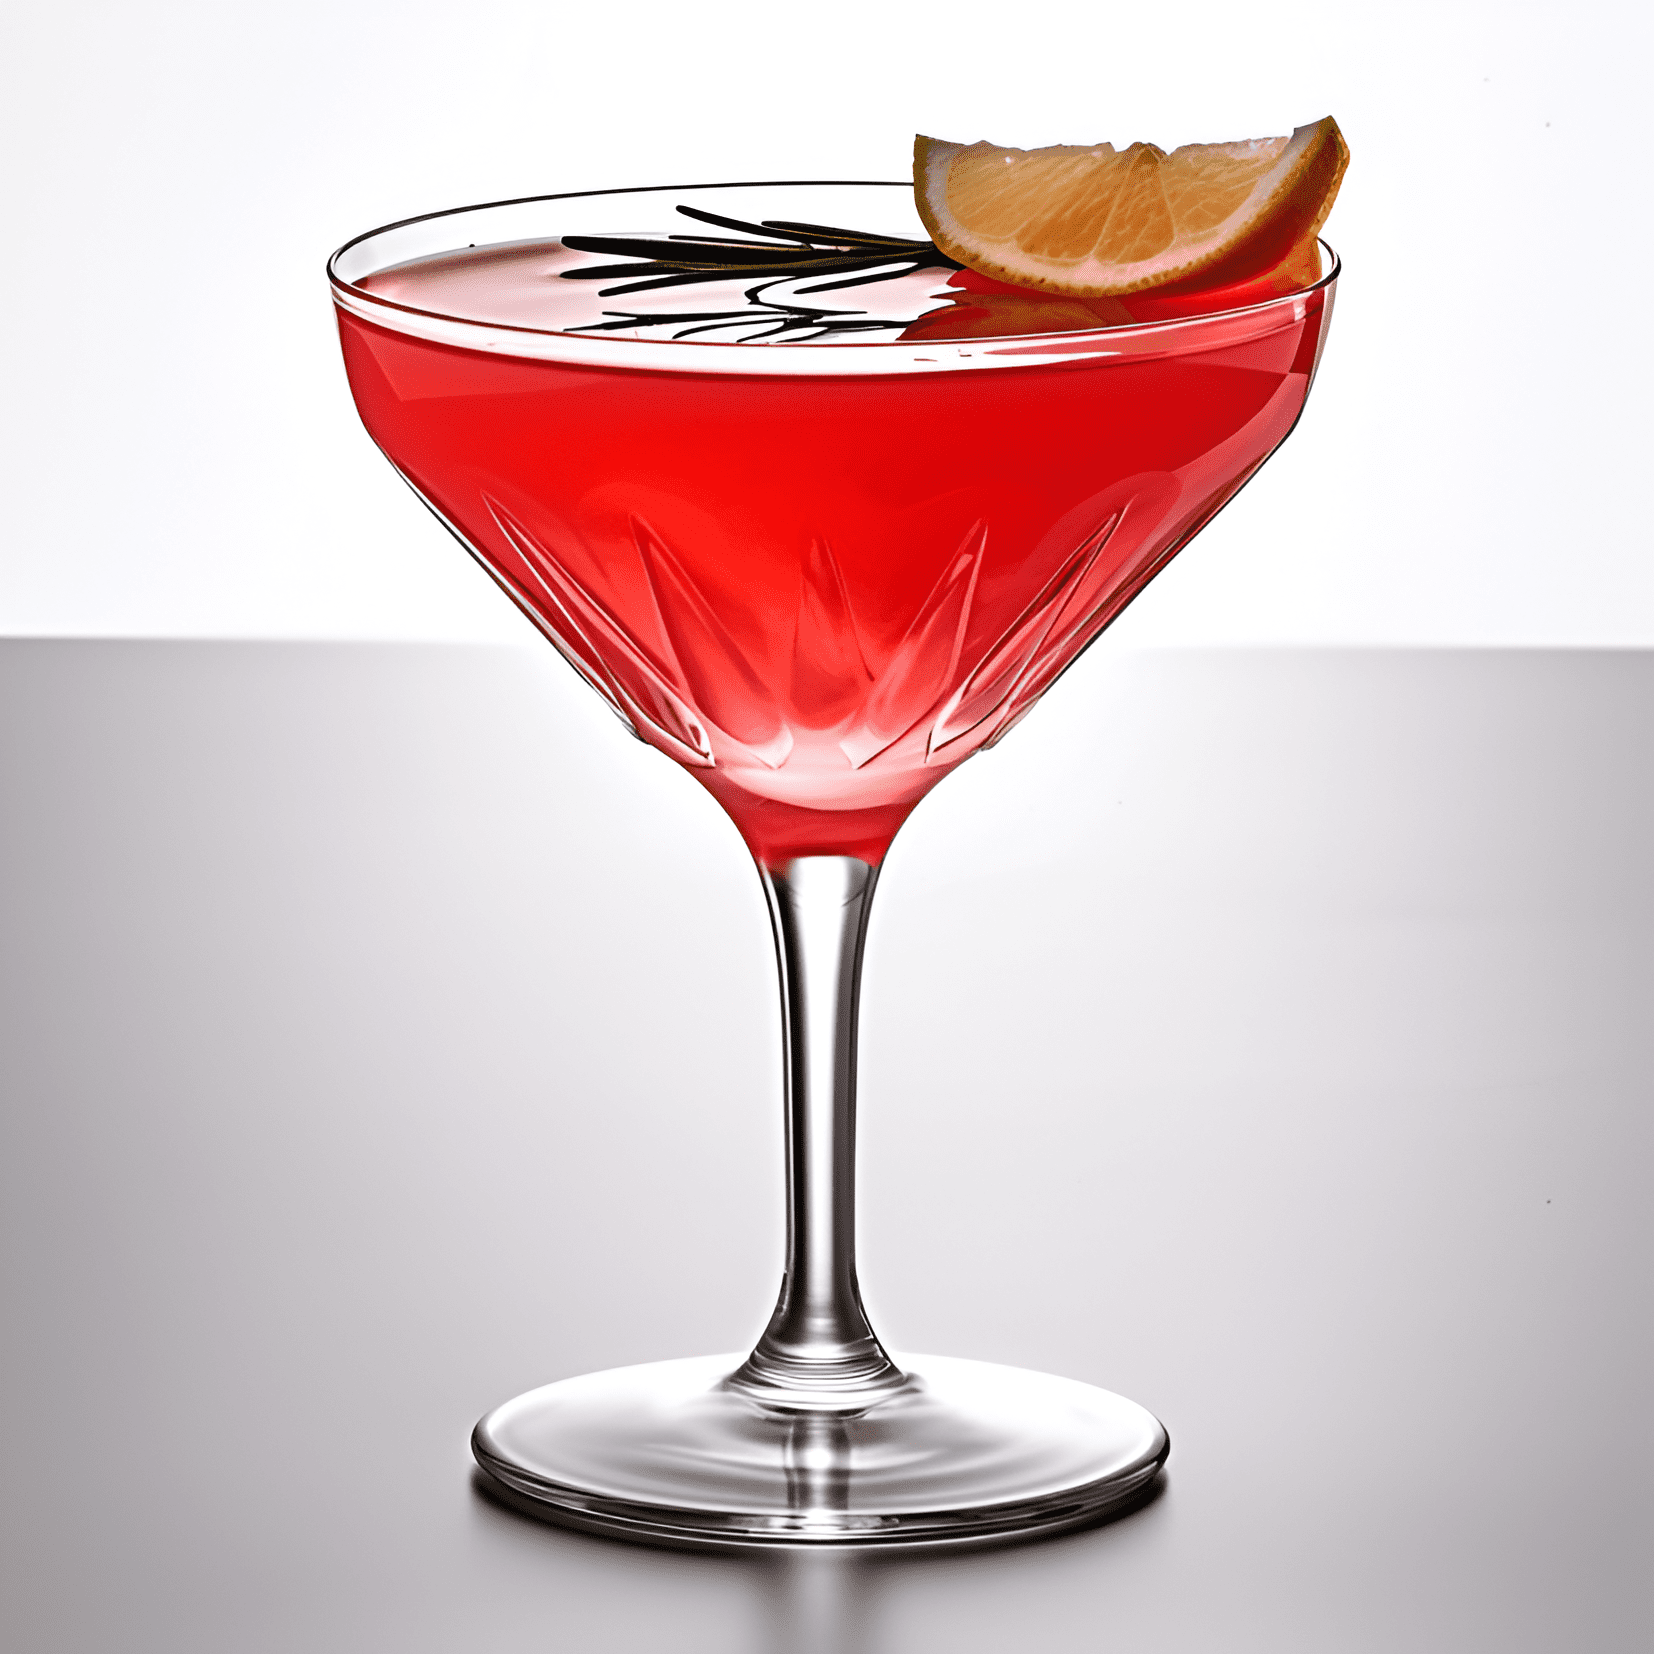 Little Devil Cocktail Recipe - The Little Devil cocktail offers a complex and intriguing taste profile, with a combination of sweet, sour, and spicy flavors. The sweetness of the grenadine and triple sec is balanced by the tartness of the lime juice, while the tequila and Tabasco sauce add a fiery kick.